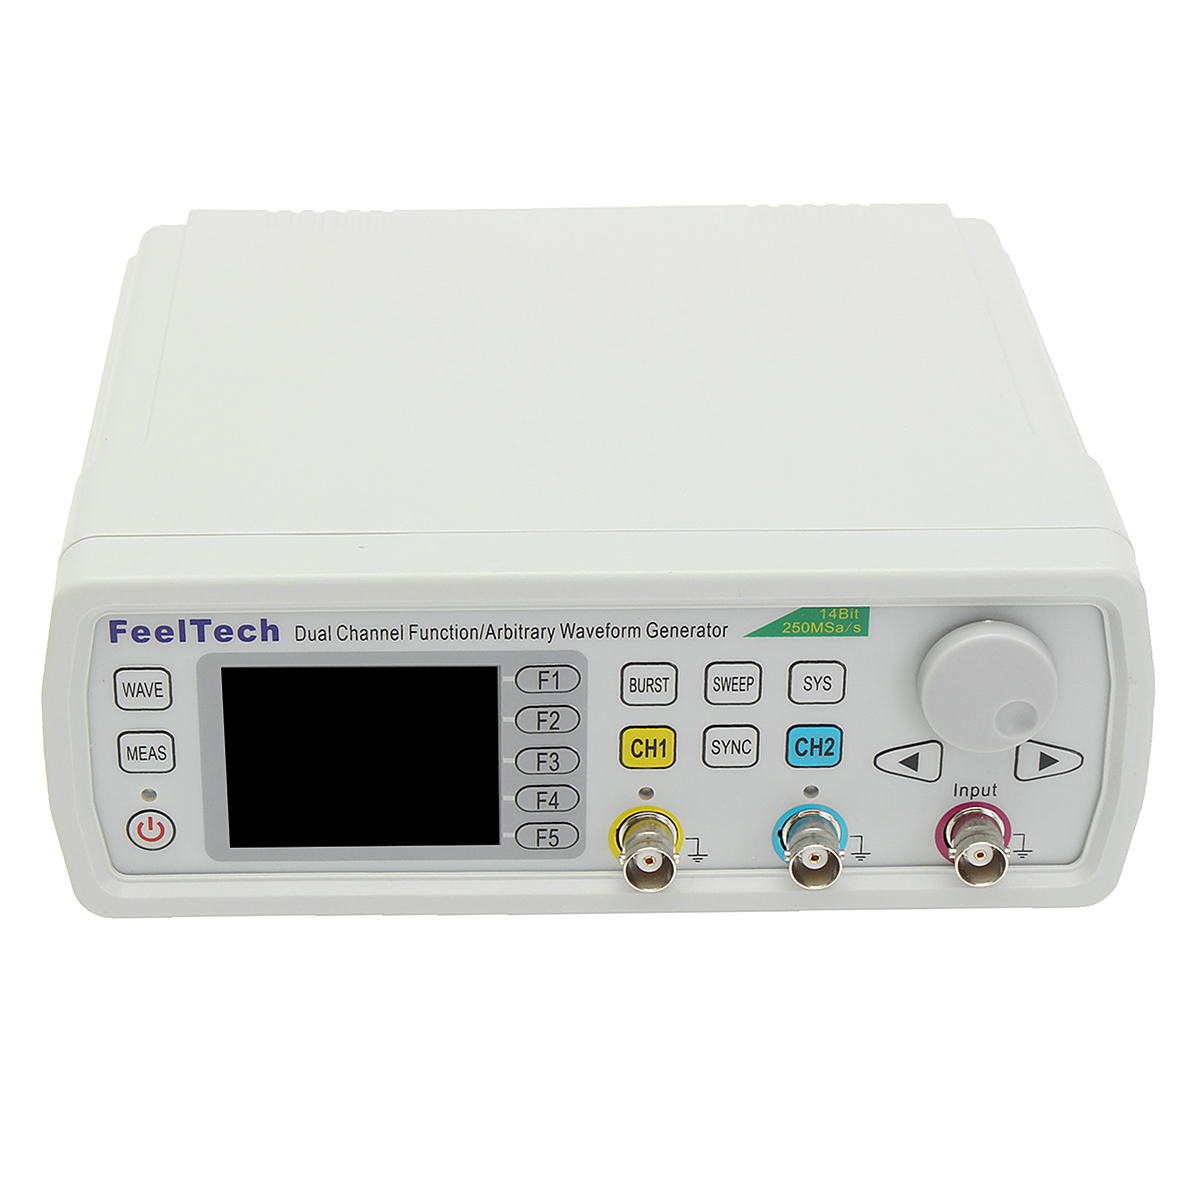 FY6600-Digital-30MHz-60MHz-Dual-Channel-DDS-Function-Arbitrary-Waveform-Signal-Generator-Frequency-M-1957884-4